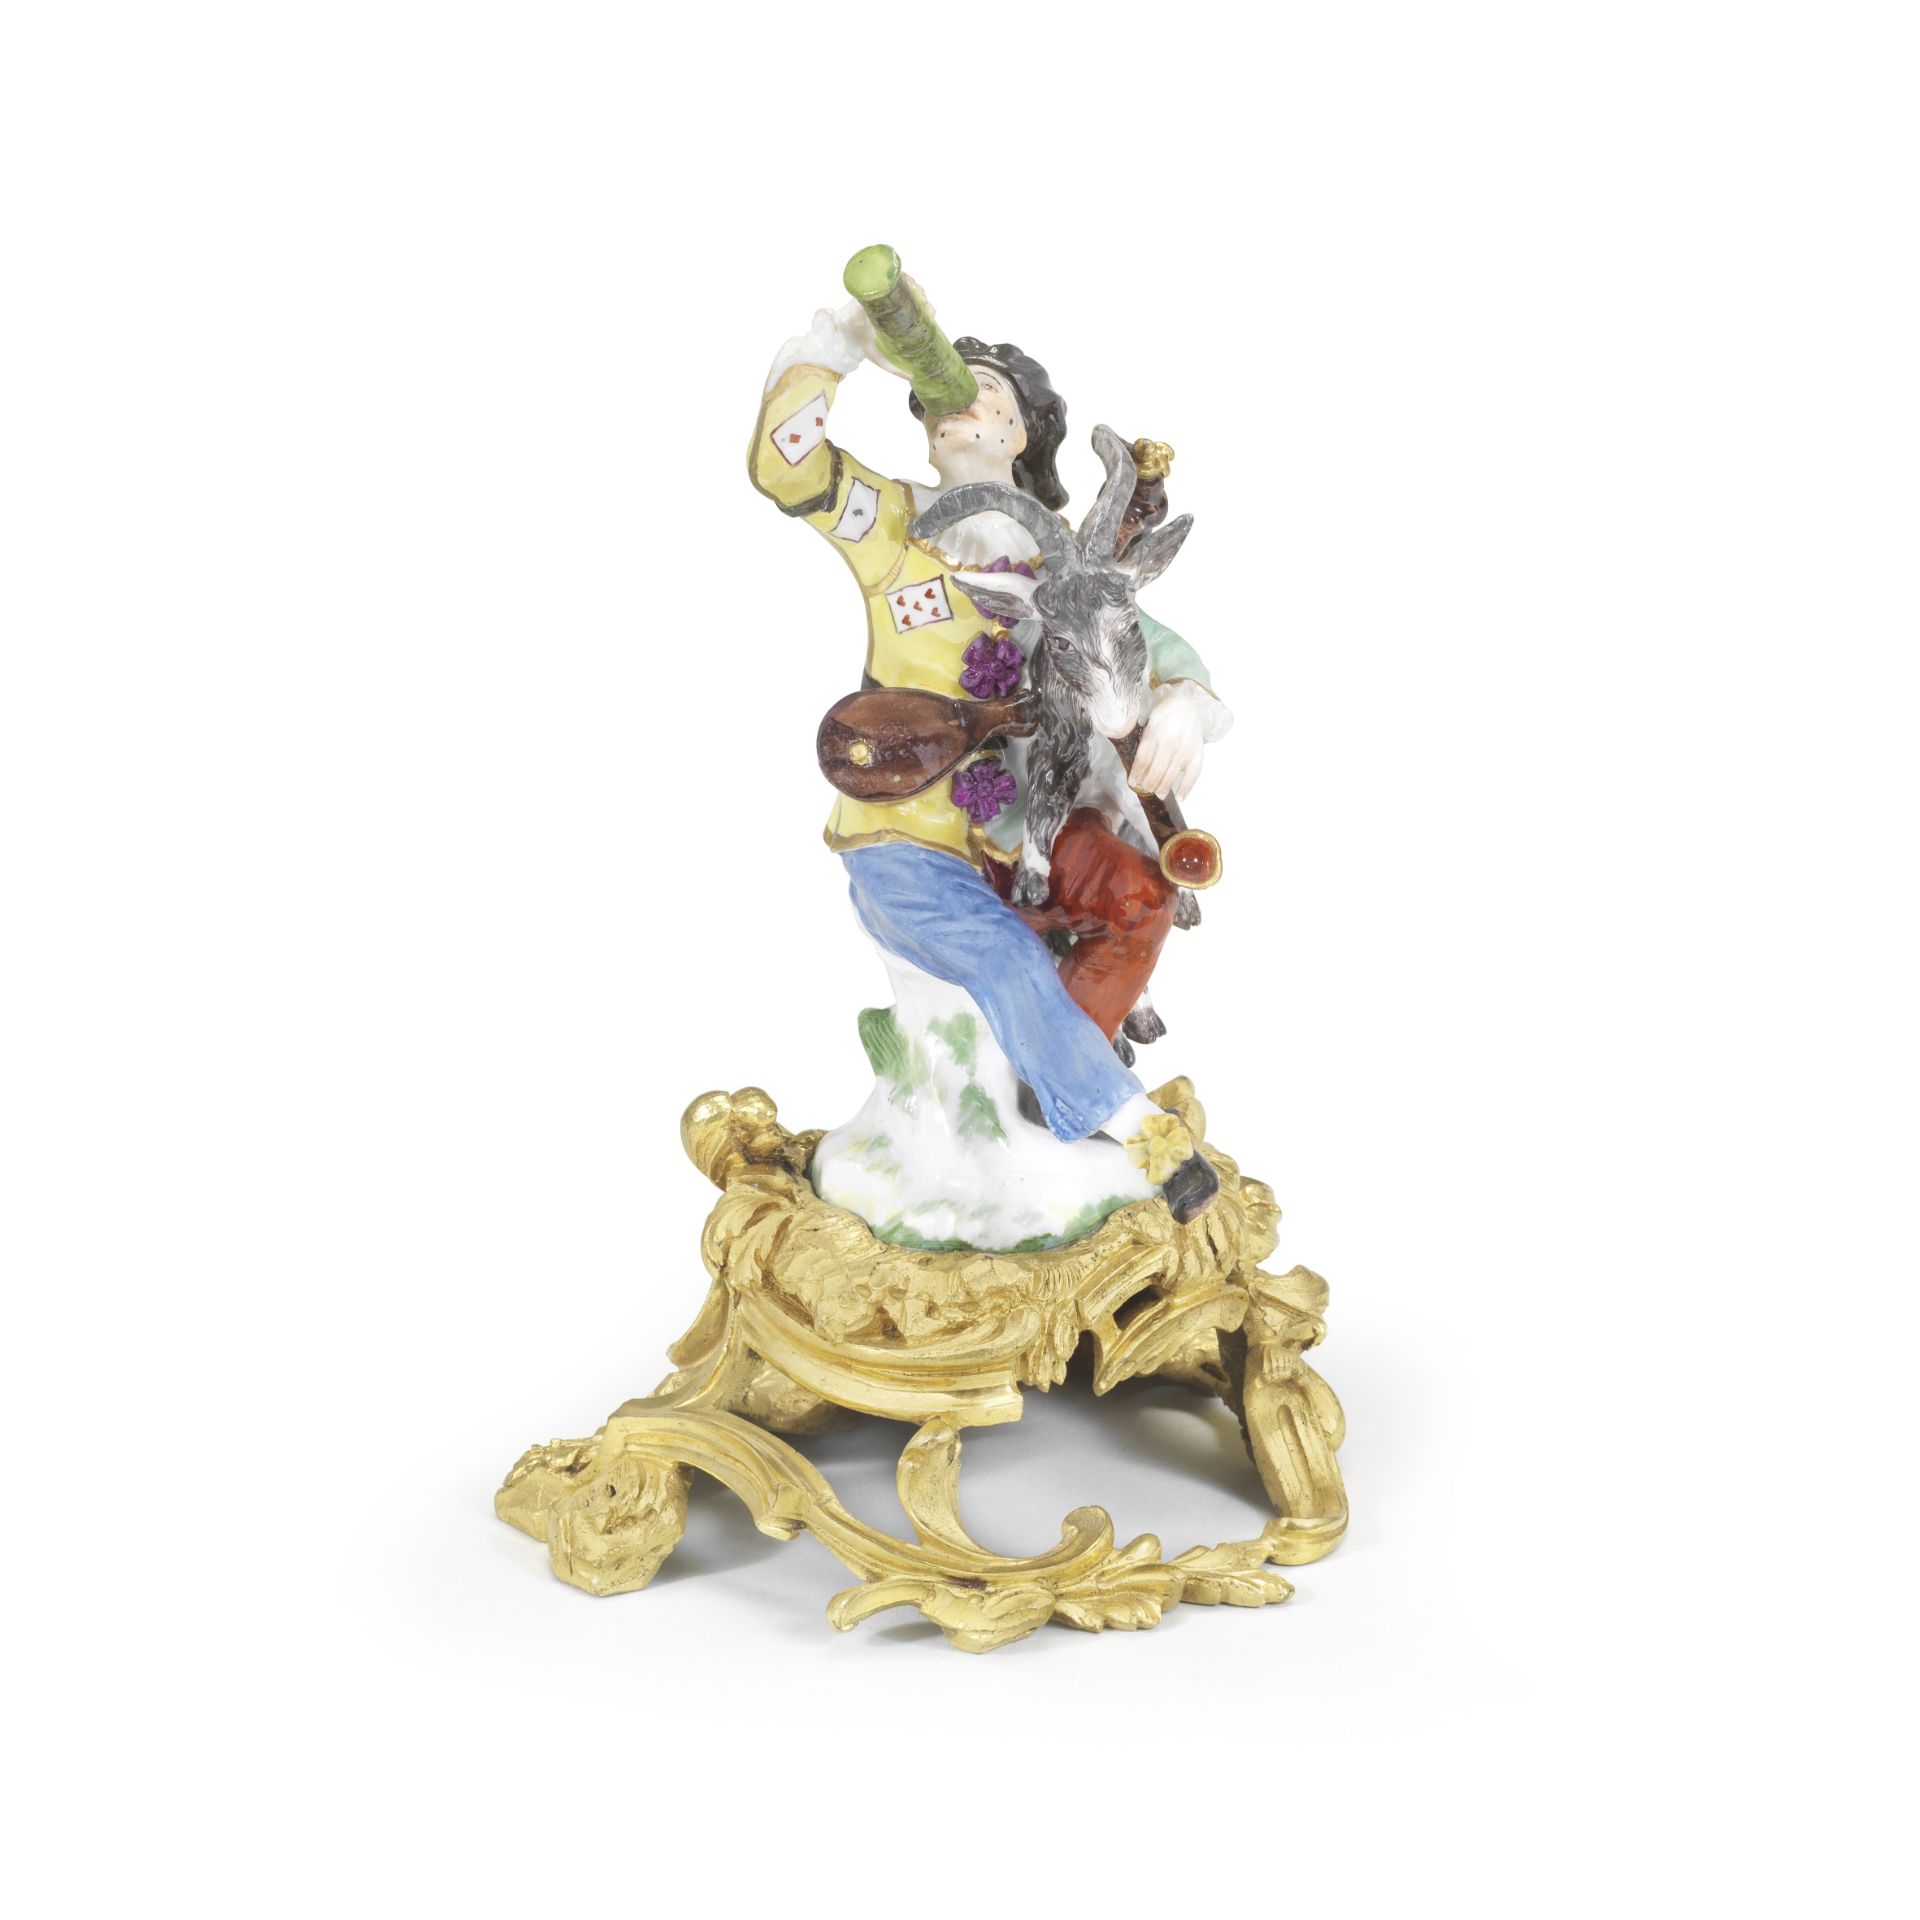 A rare Meissen ormolu-mounted figure of Harlequin with a 'Pass Glass', circa 1740